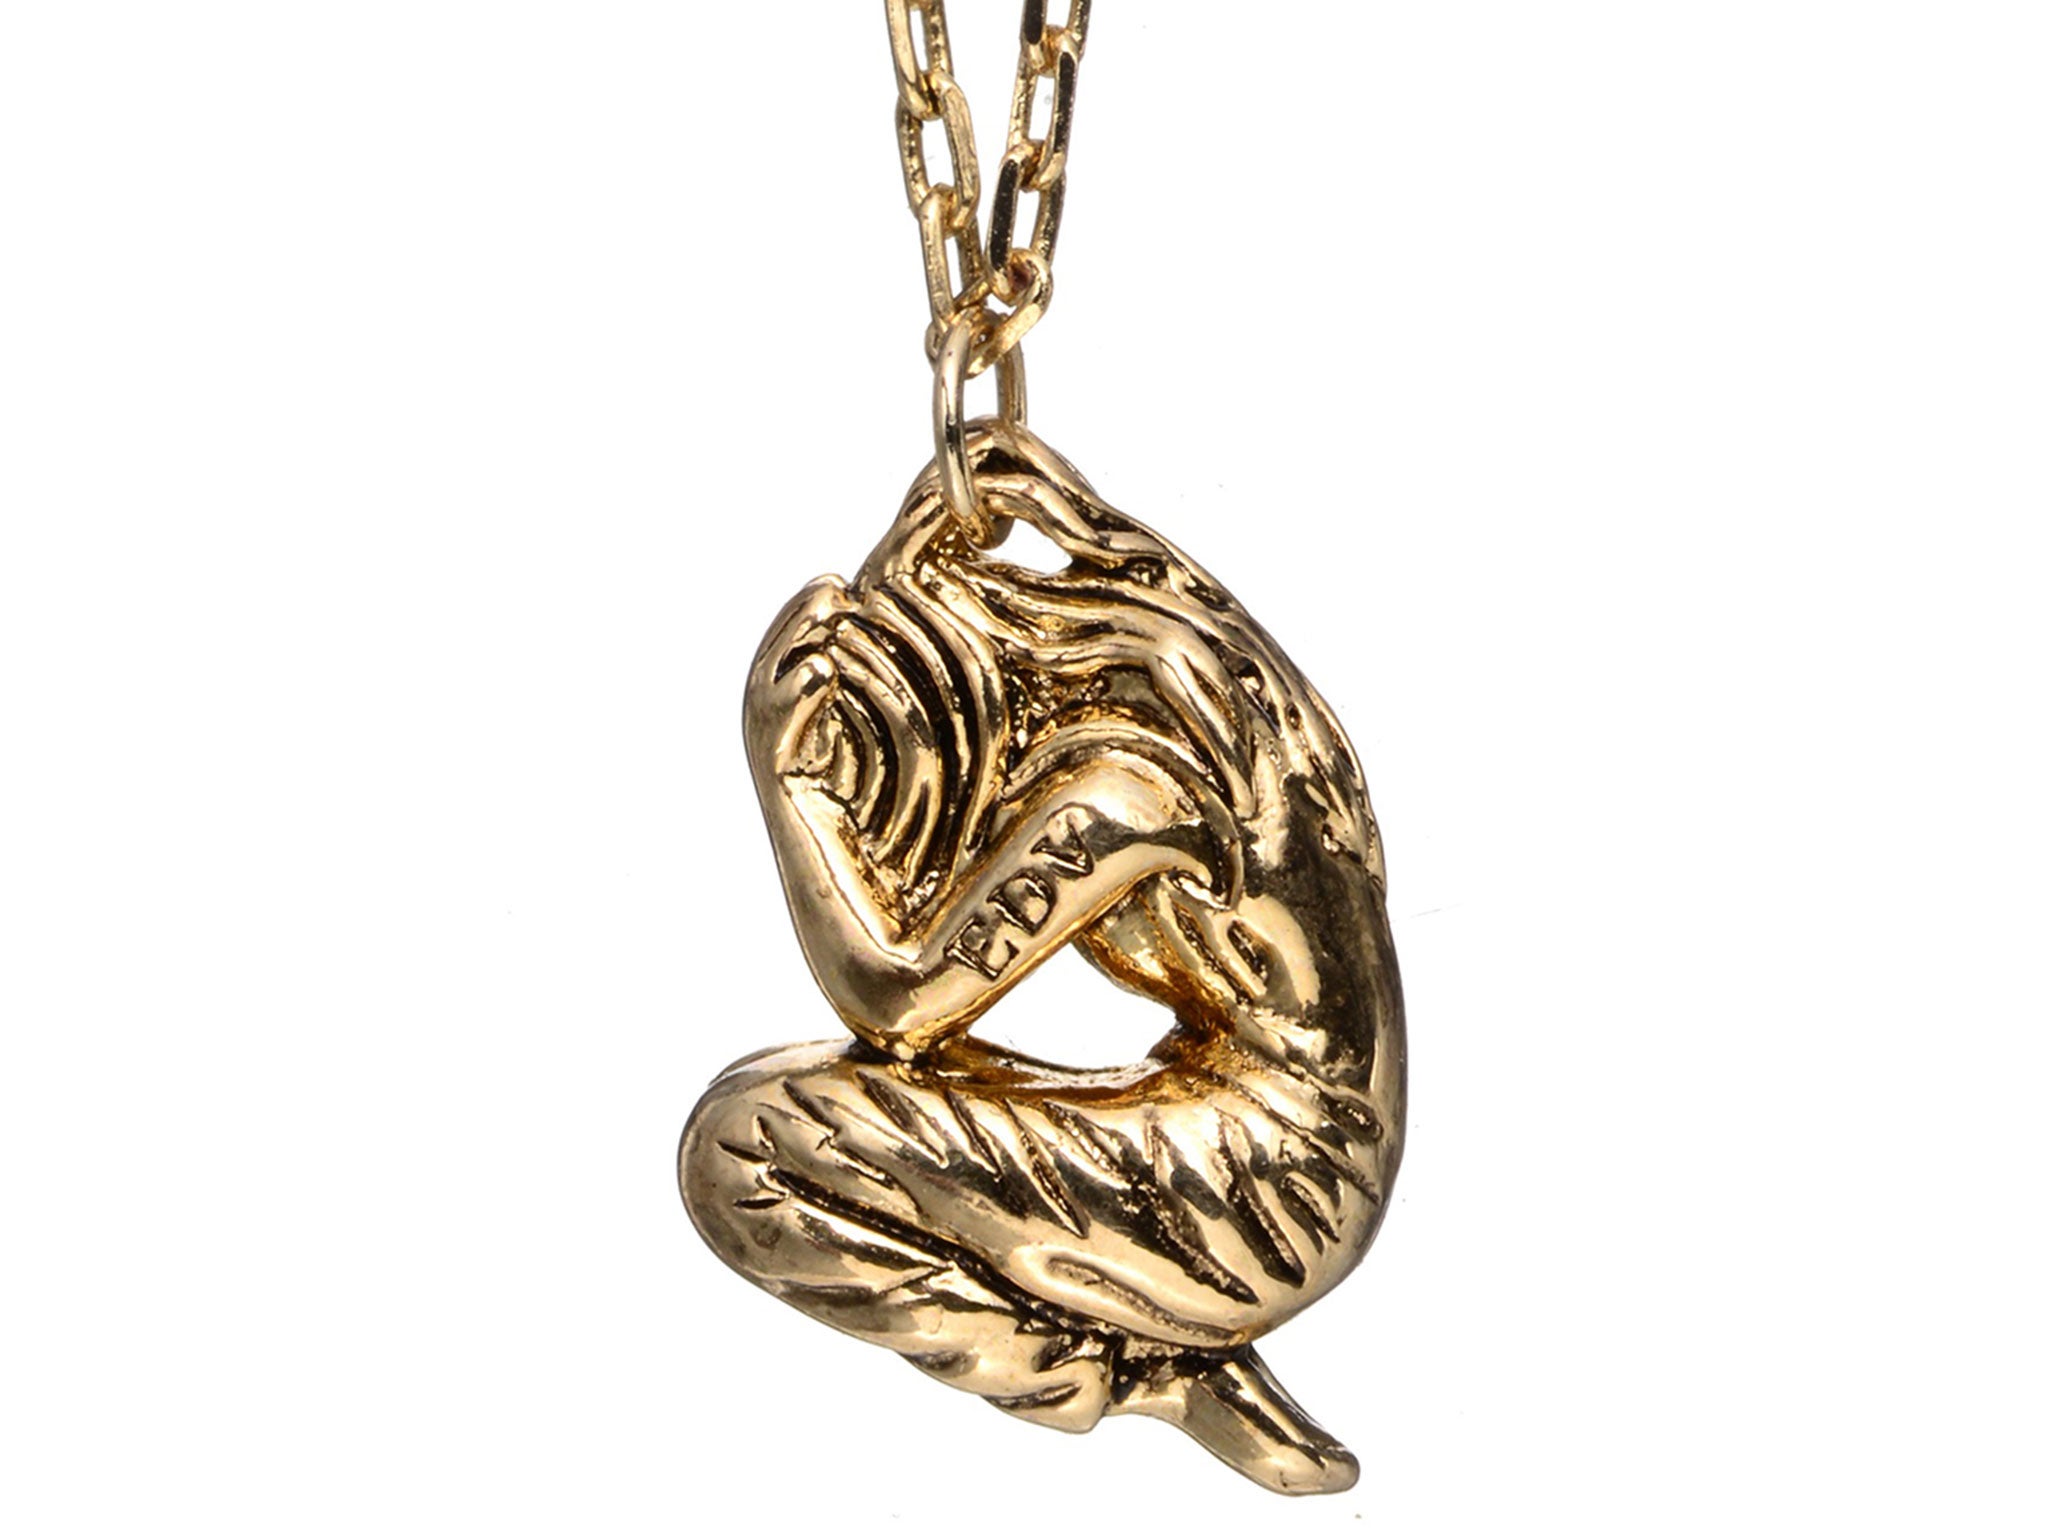 The pendant appears to be the silhouette of a woman on her knees, in fetal position, with her head in her hands